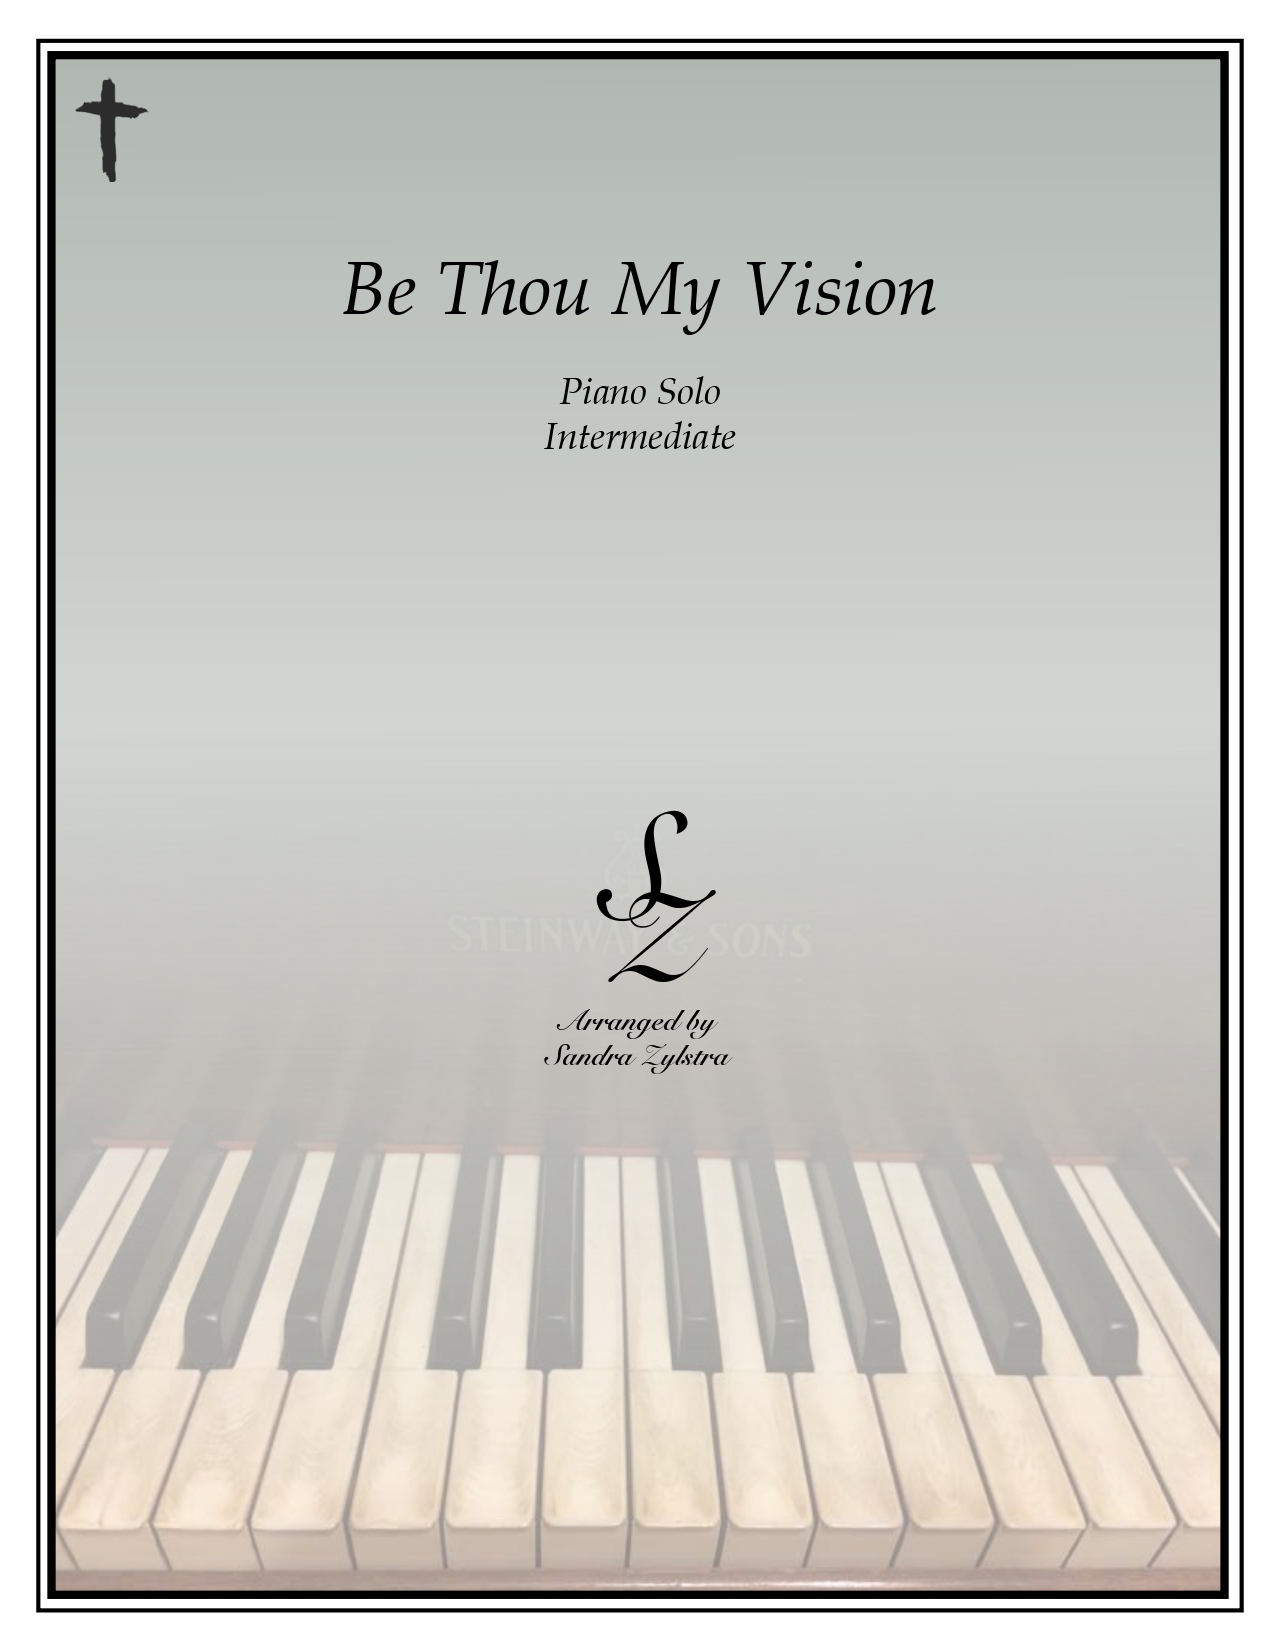 Be Thou My Vision intermediate piano cover page 00011